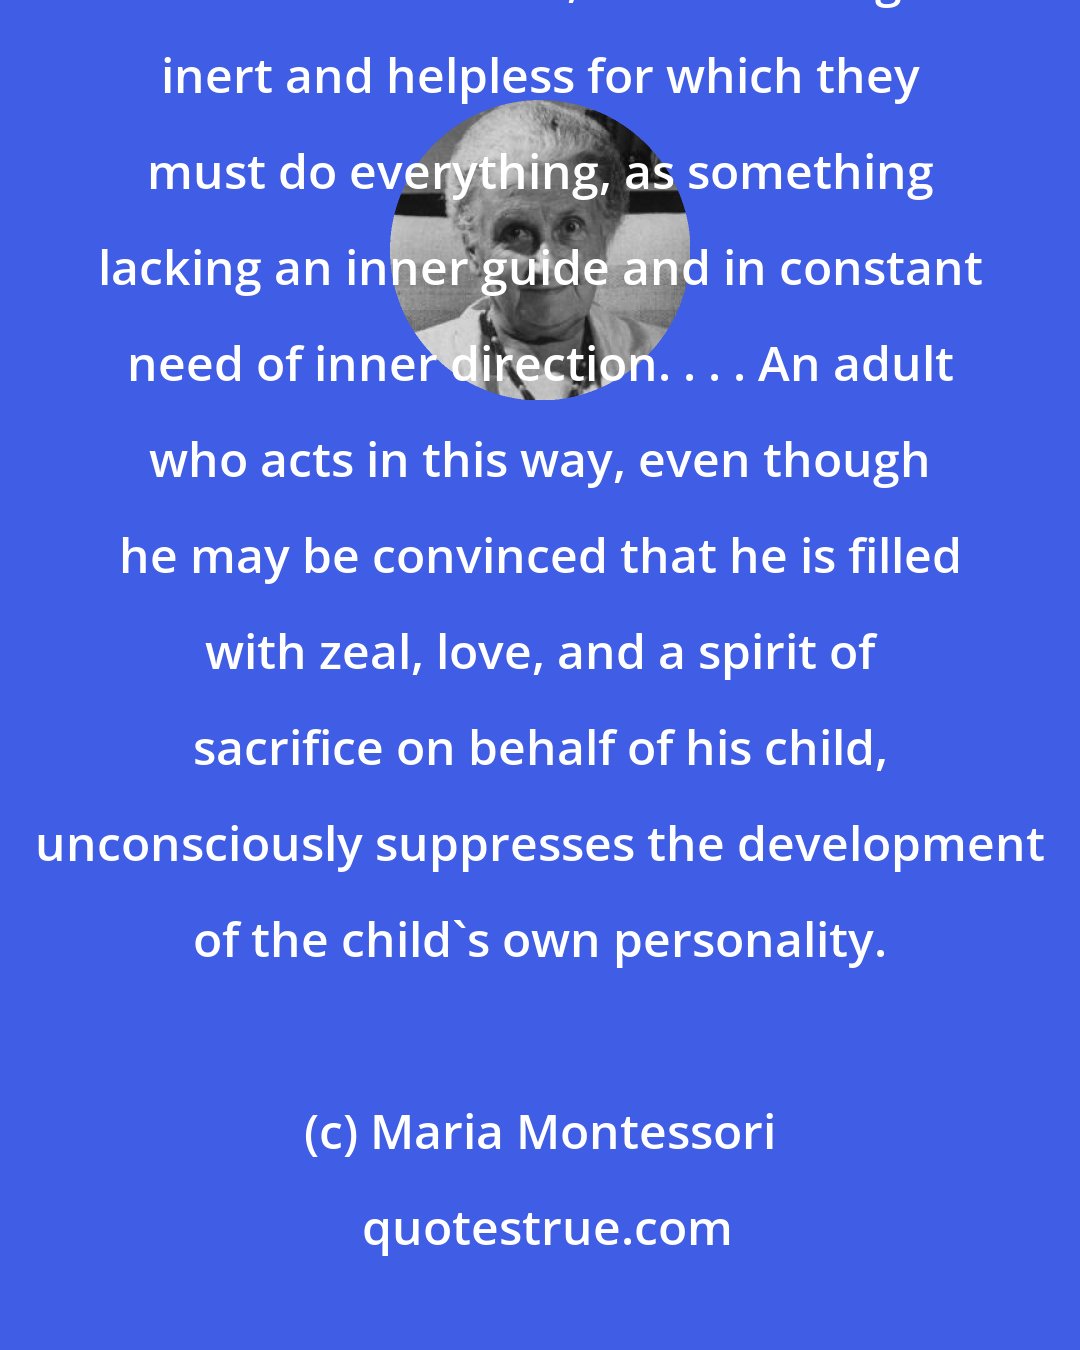 Maria Montessori: Adults look upon a child as something empty that is to be filled through their own efforts, as something inert and helpless for which they must do everything, as something lacking an inner guide and in constant need of inner direction. . . . An adult who acts in this way, even though he may be convinced that he is filled with zeal, love, and a spirit of sacrifice on behalf of his child, unconsciously suppresses the development of the child's own personality.